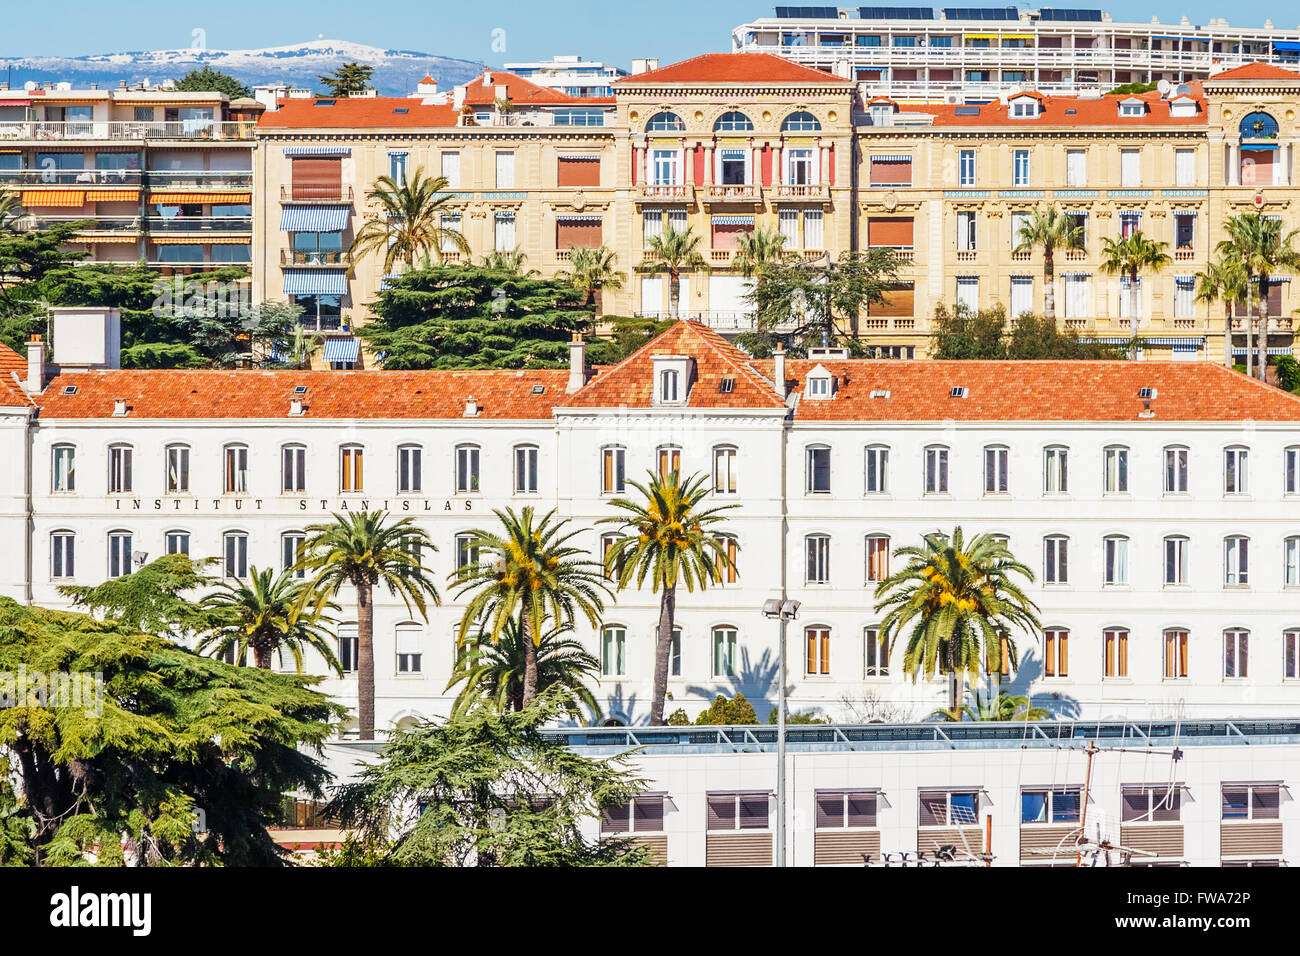 Panoramic view of Le Suquet - the old town of Cannes, France Cote d'Azur Stock Photo